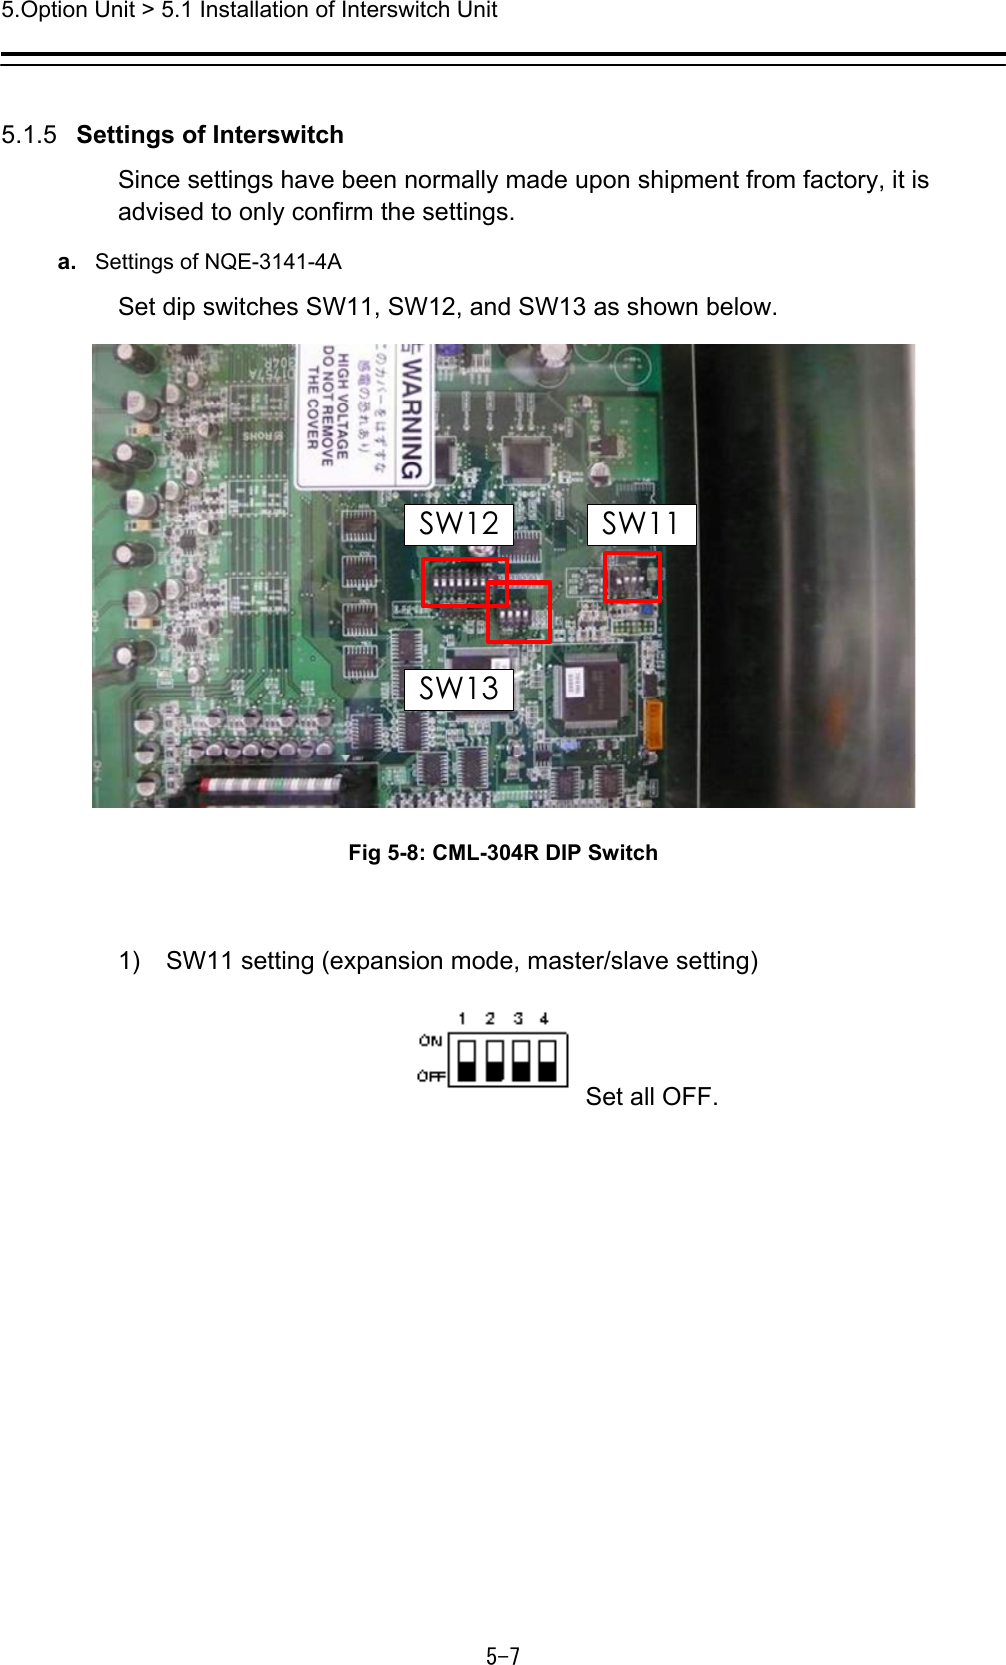 5.Option Unit &gt; 5.1 Installation of Interswitch Unit 5-7  5.1.5   Settings of Interswitch Since settings have been normally made upon shipment from factory, it is advised to only confirm the settings. a.  Settings of NQE-3141-4A Set dip switches SW11, SW12, and SW13 as shown below. SW11SW13SW12 Fig 5-8: CML-304R DIP Switch  1)   SW11 setting (expansion mode, master/slave setting) Set all OFF. 